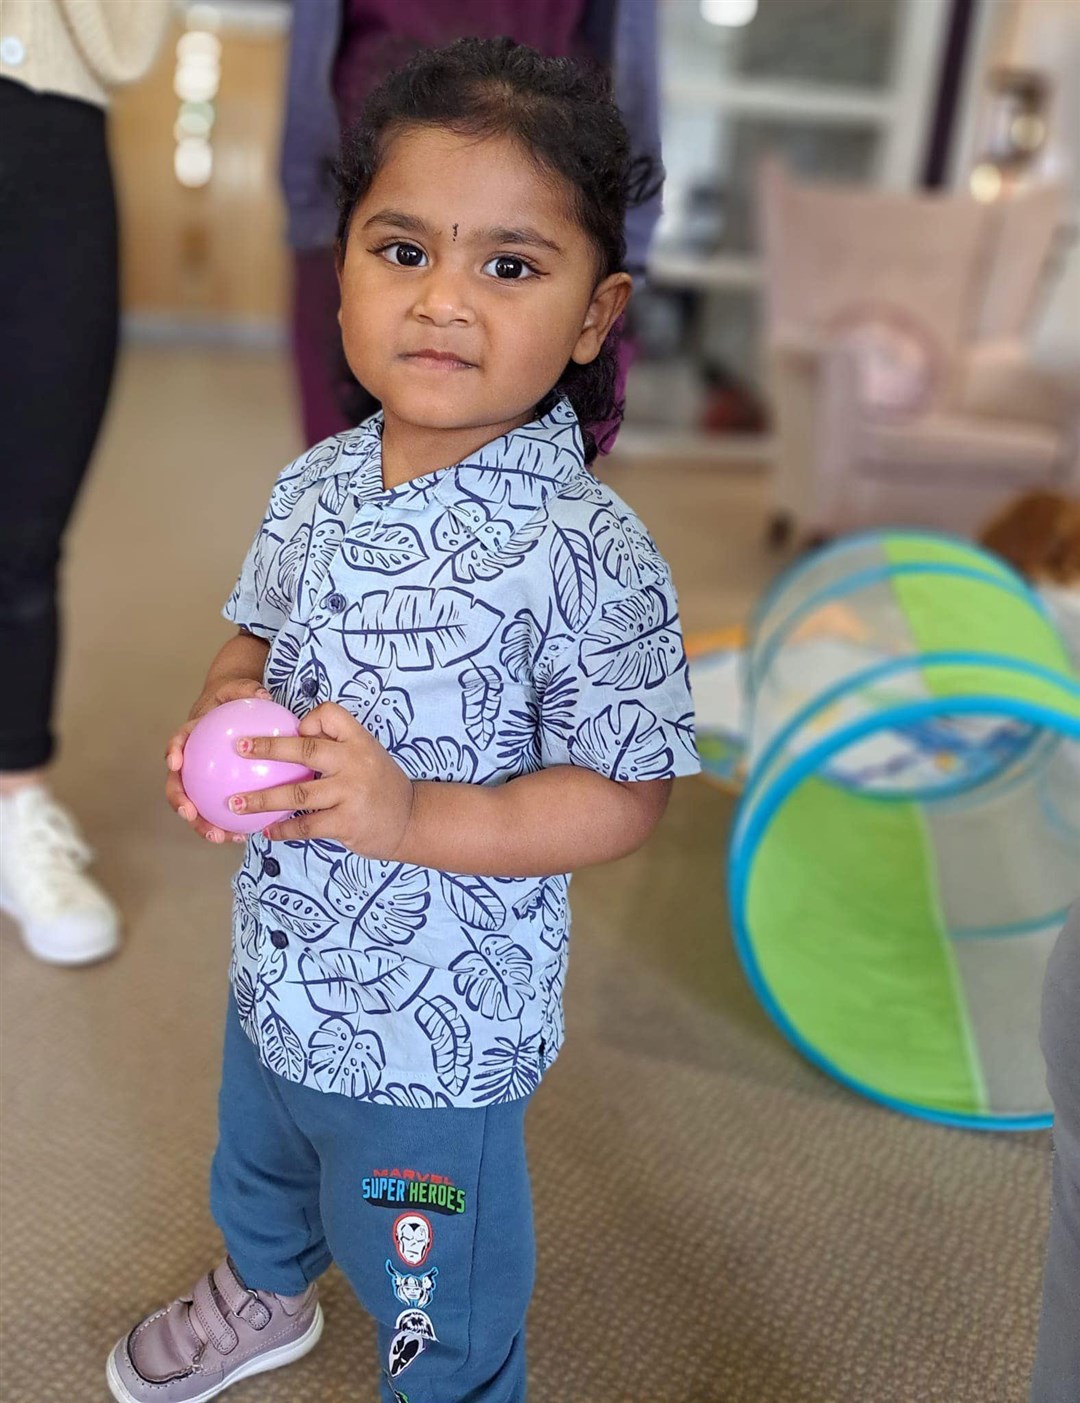 Urray House care home in Muir of Ord were "delighted" with the attendance of their first parent and toddler event. Picture: Parklands Care Homes.